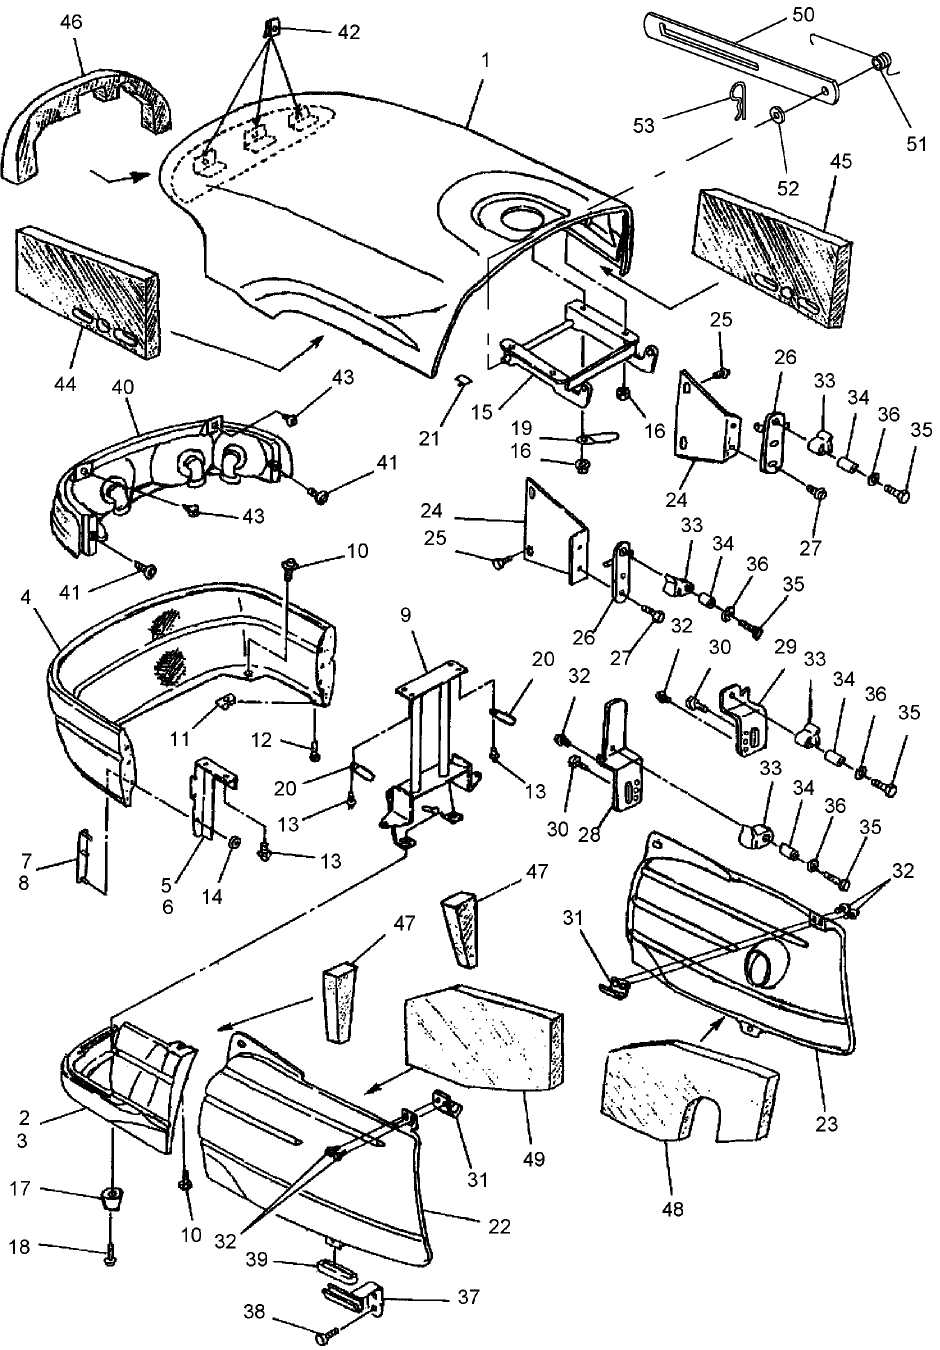 14B02 HOOD & RELATED PARTS